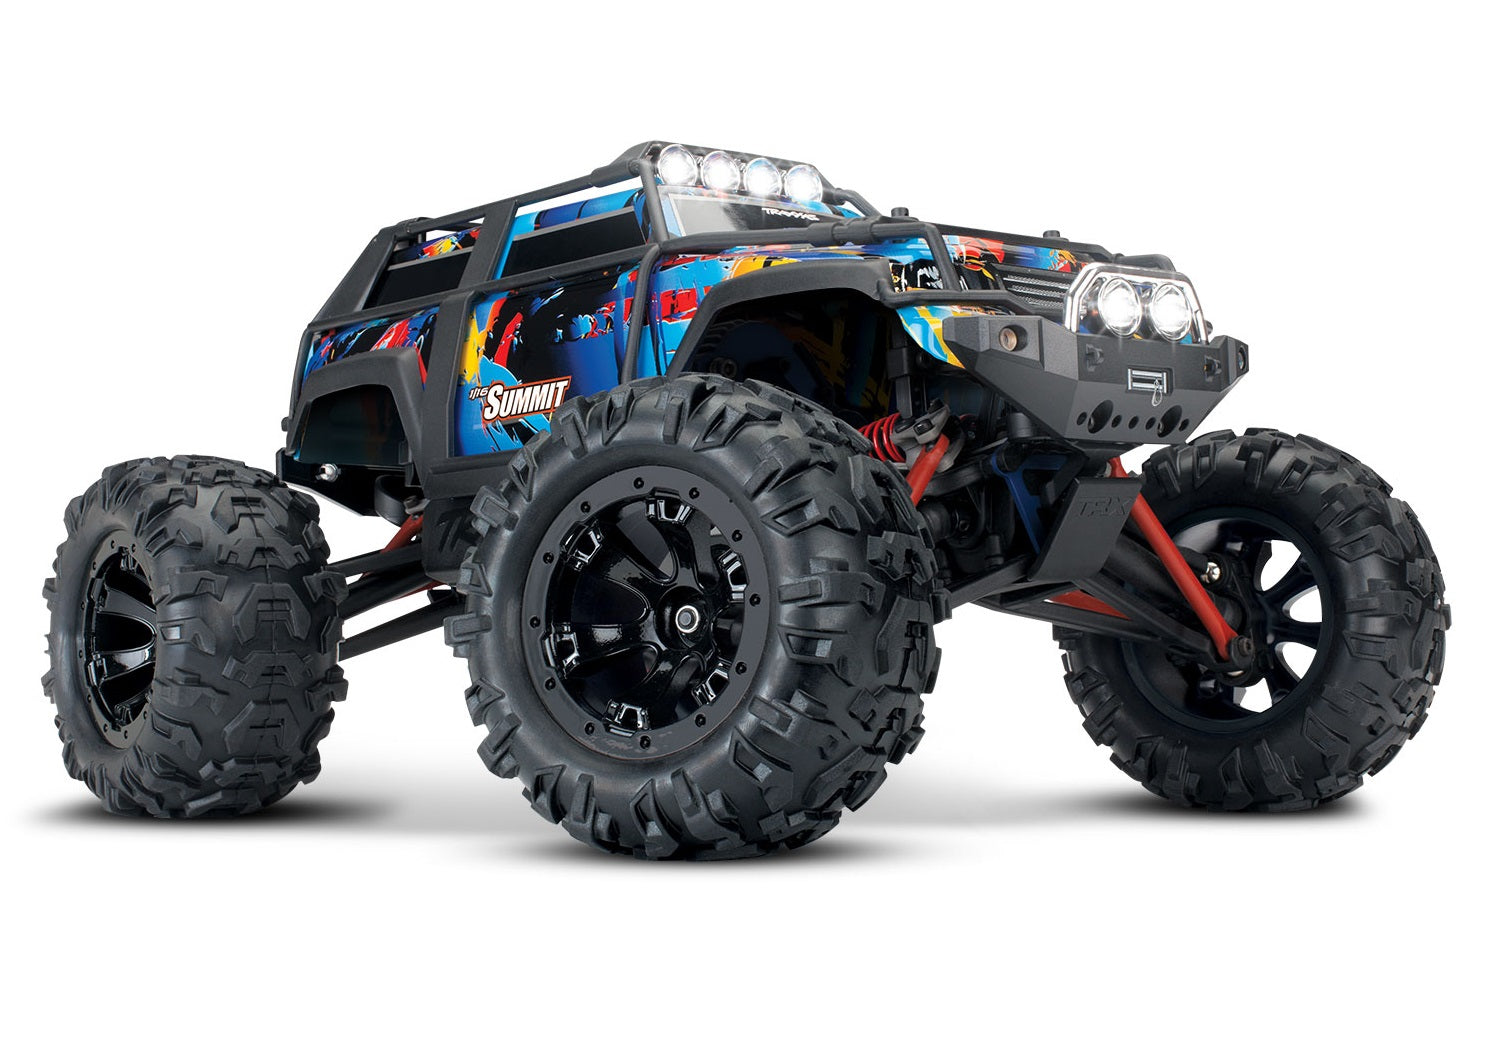 72054-5 - Summit: 1/16 Scale 4WD Electric Extreme Terrain Monster Truck. Ready-To-Race